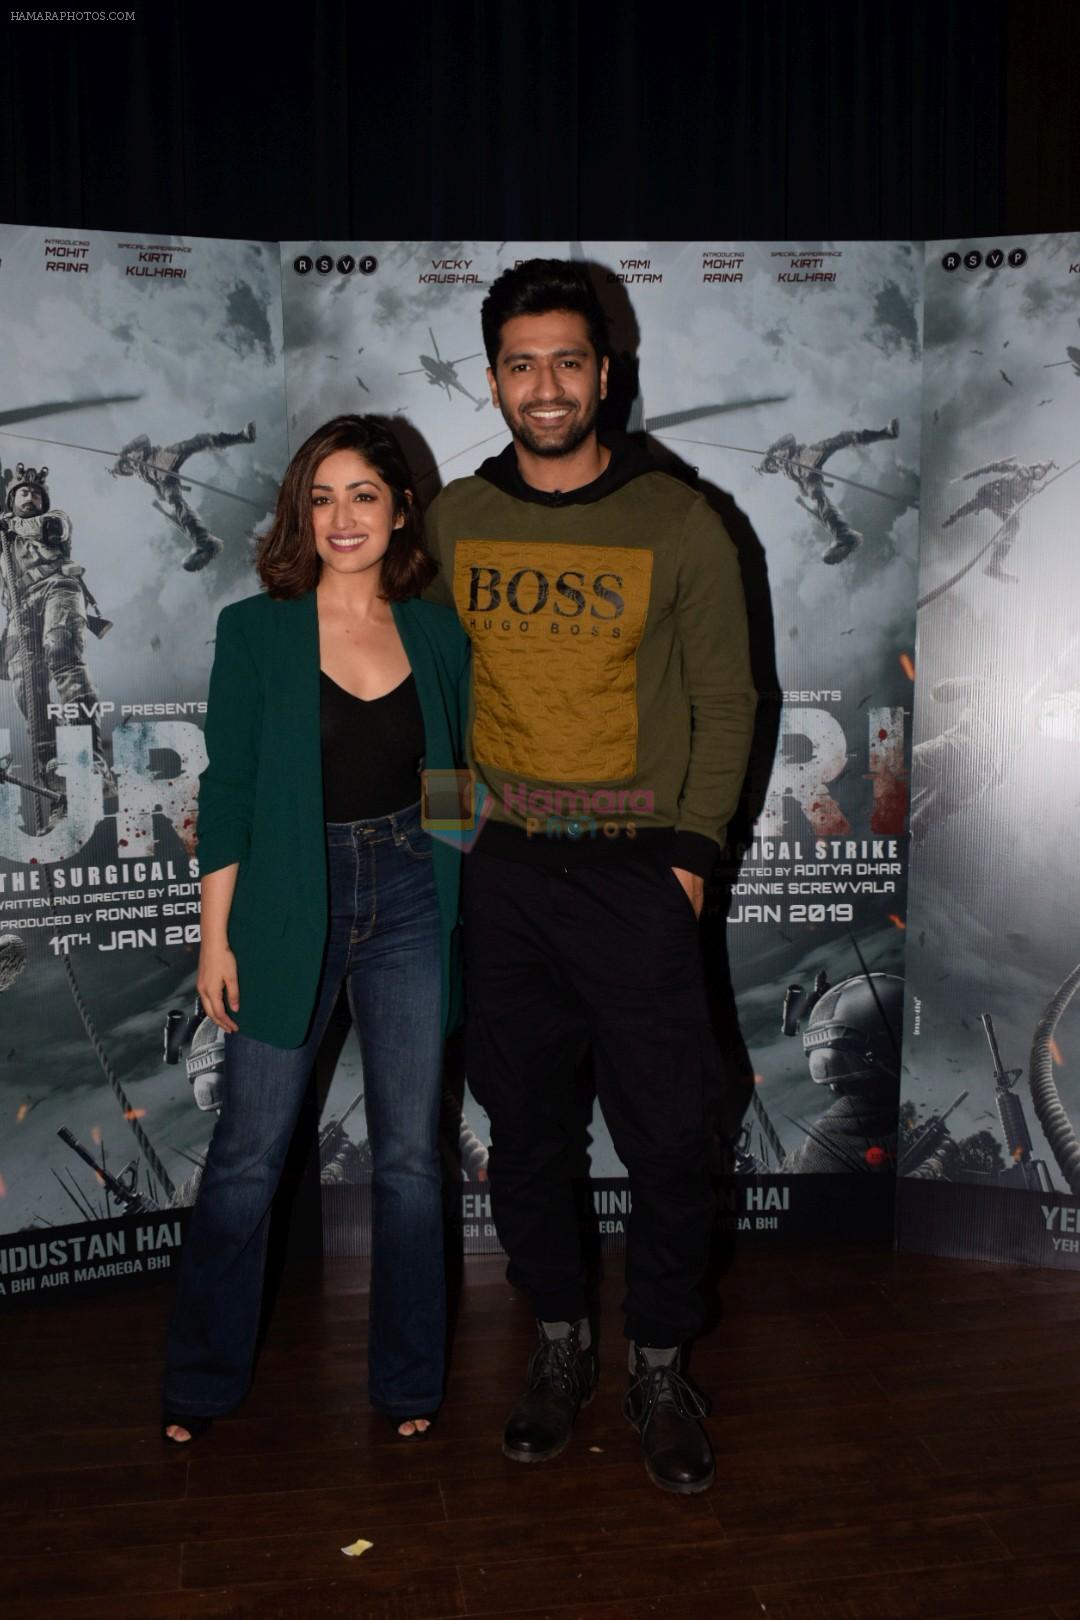 Yami Guatam, Vicky Kaushal during the media interactions for thier film Uri in jw marriott juhu on 22nd Dec 2018